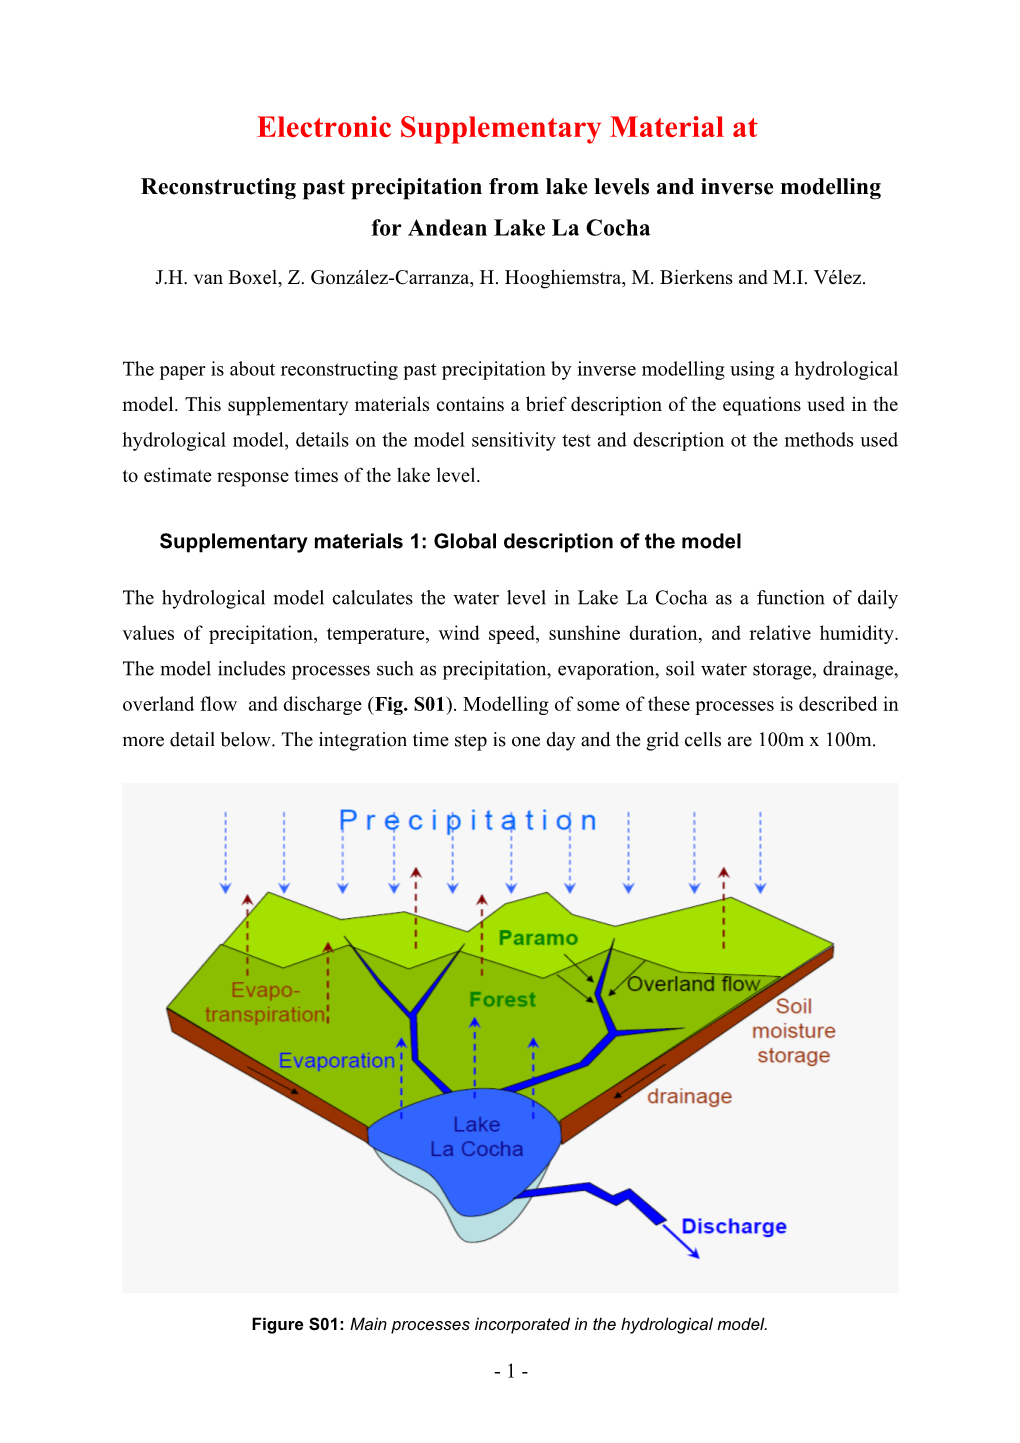 A Hydrological Model for Reconstructing Past Precipitation from Lake Level Records